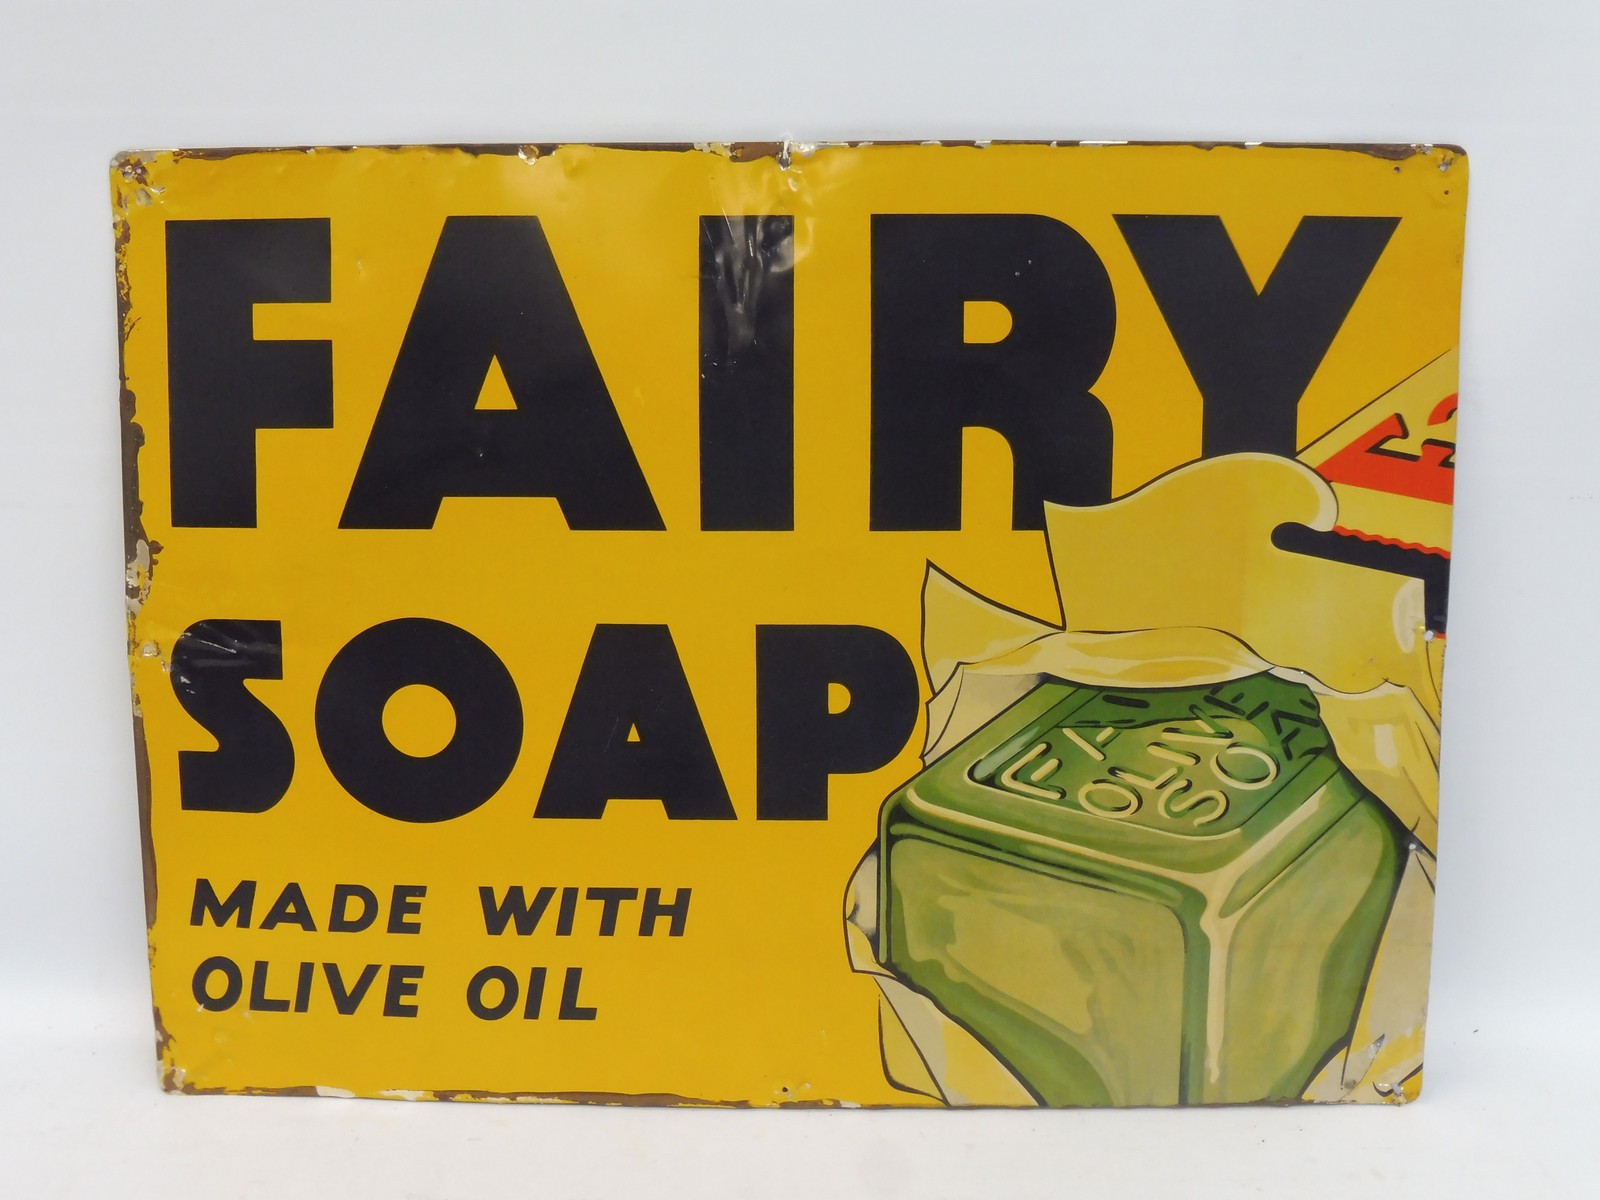 A Fairy Soap 'Made with olive oil' rectangular tin advertising sign, 21 x 15 1/2".